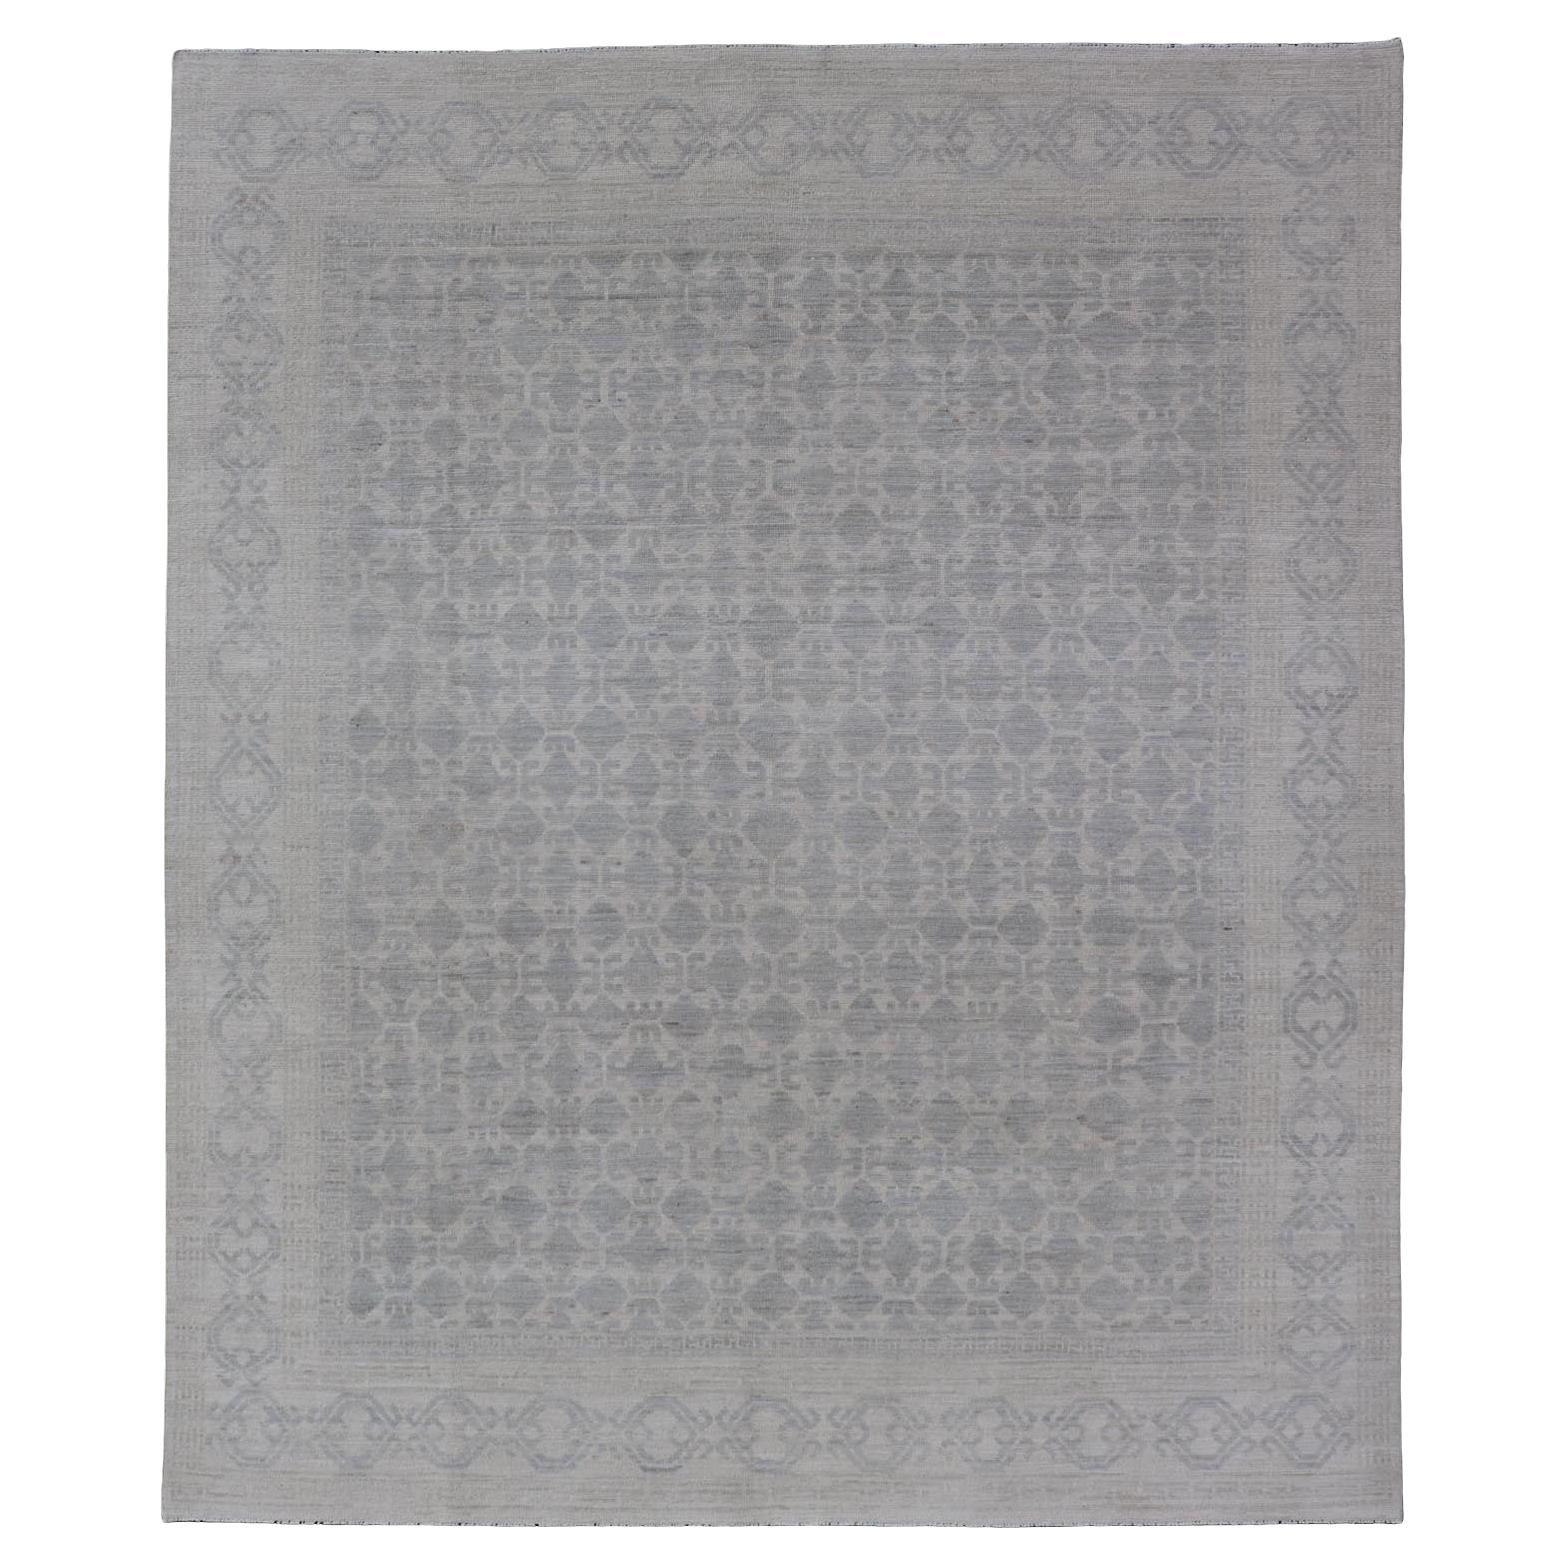 Modern All-Over Tribal Motif Khotan Area Rug in Muted Gray's and Cream